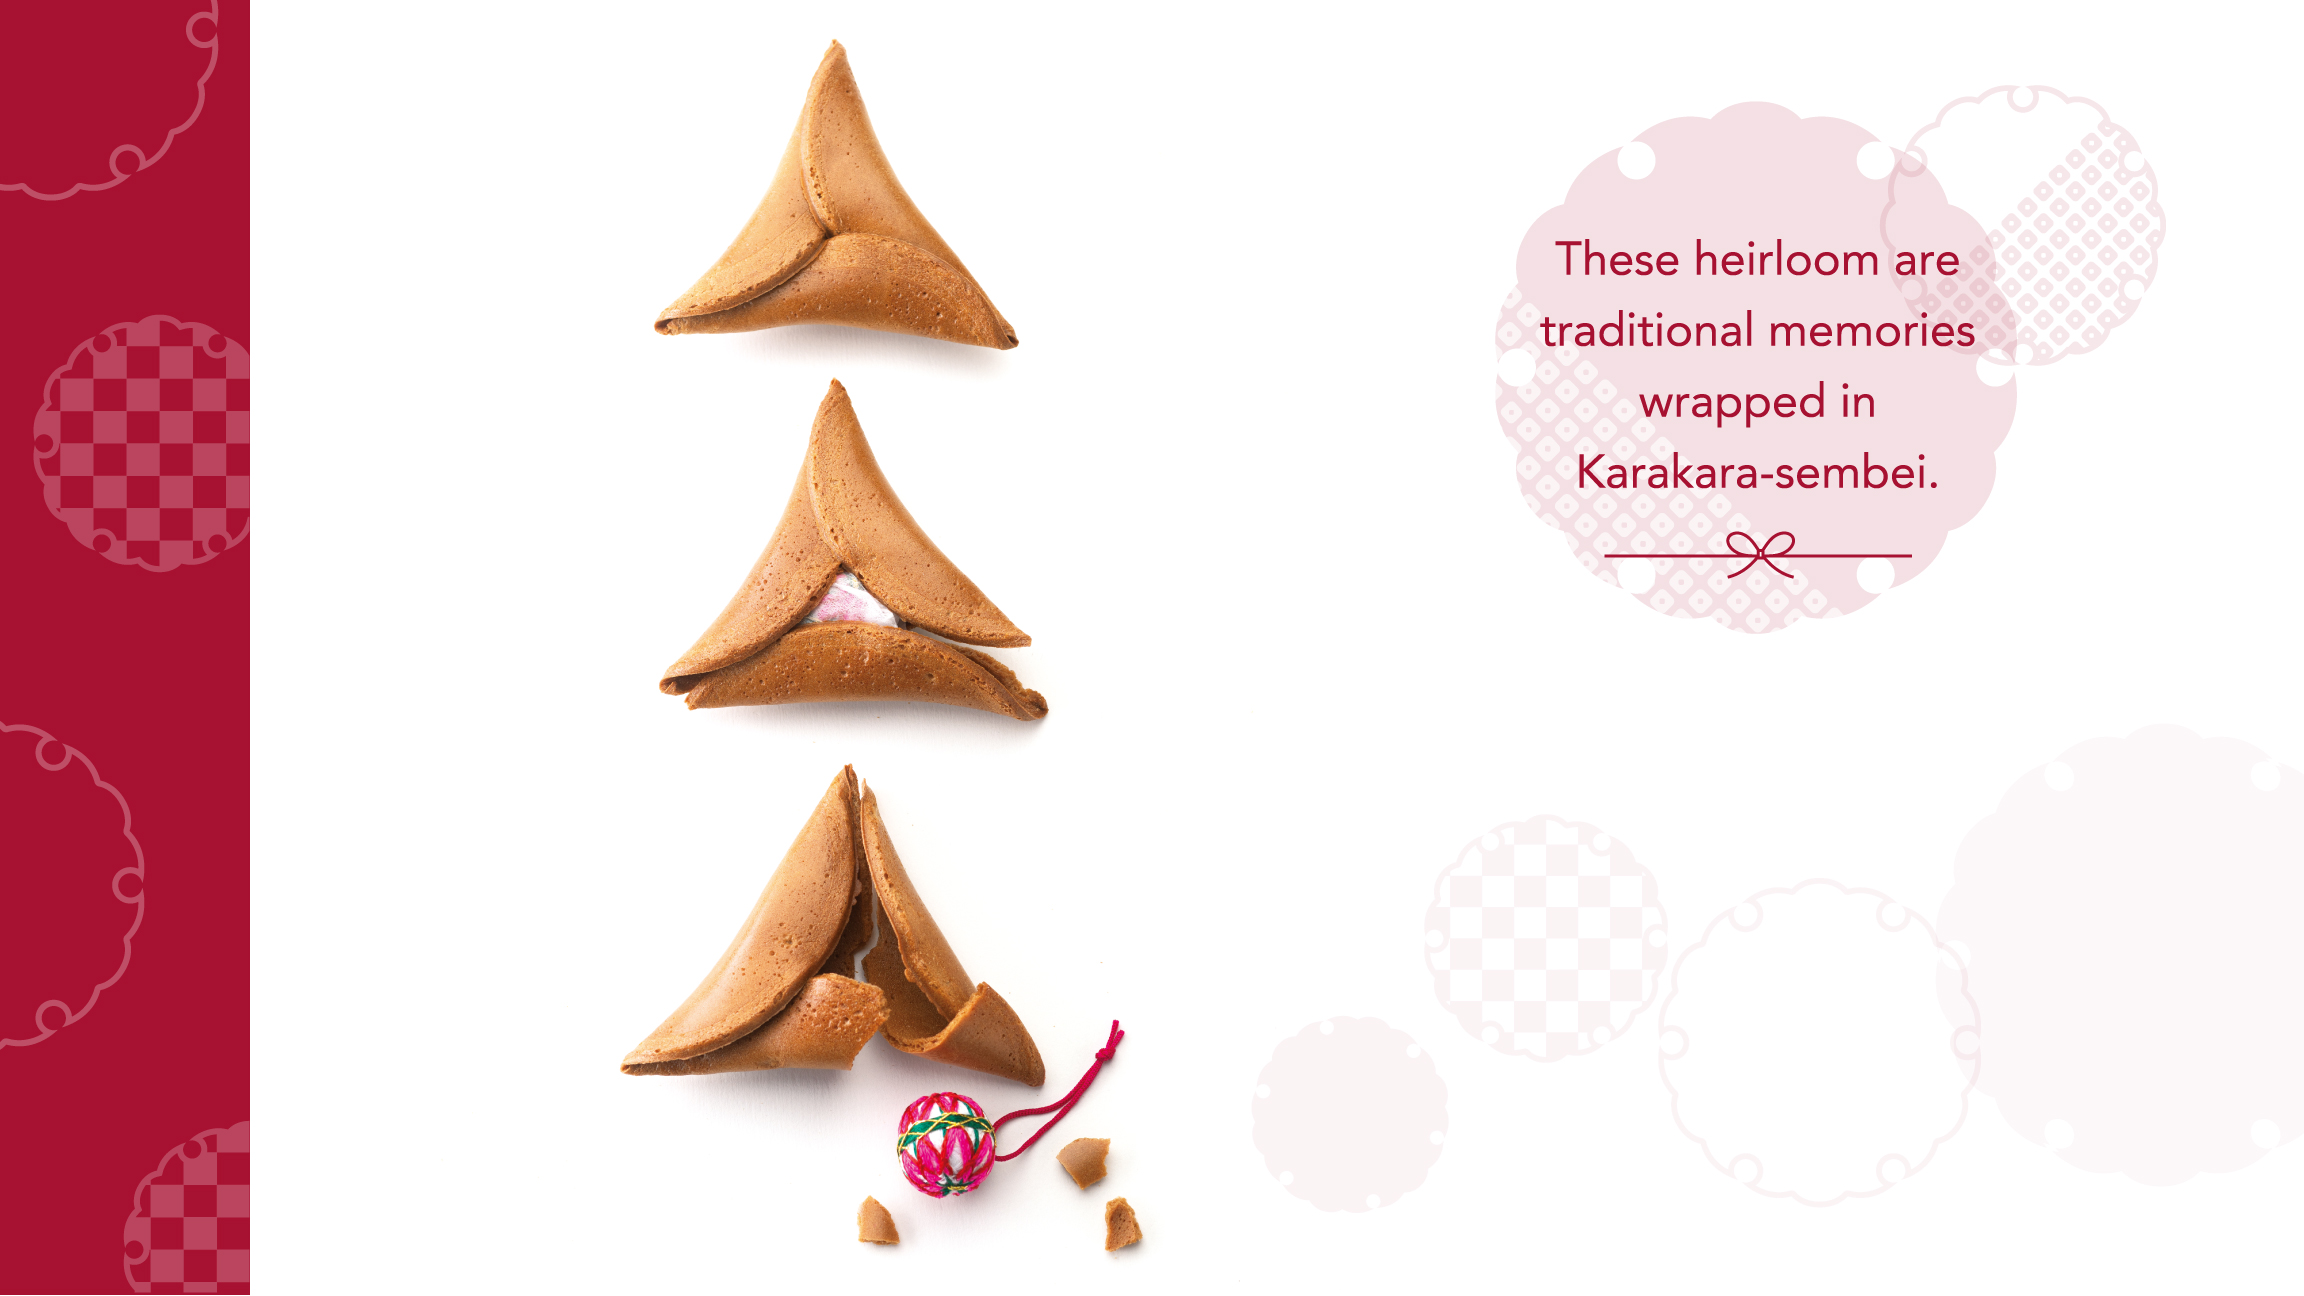 There heirloom are traditional memories wrapped in karakara-sembei